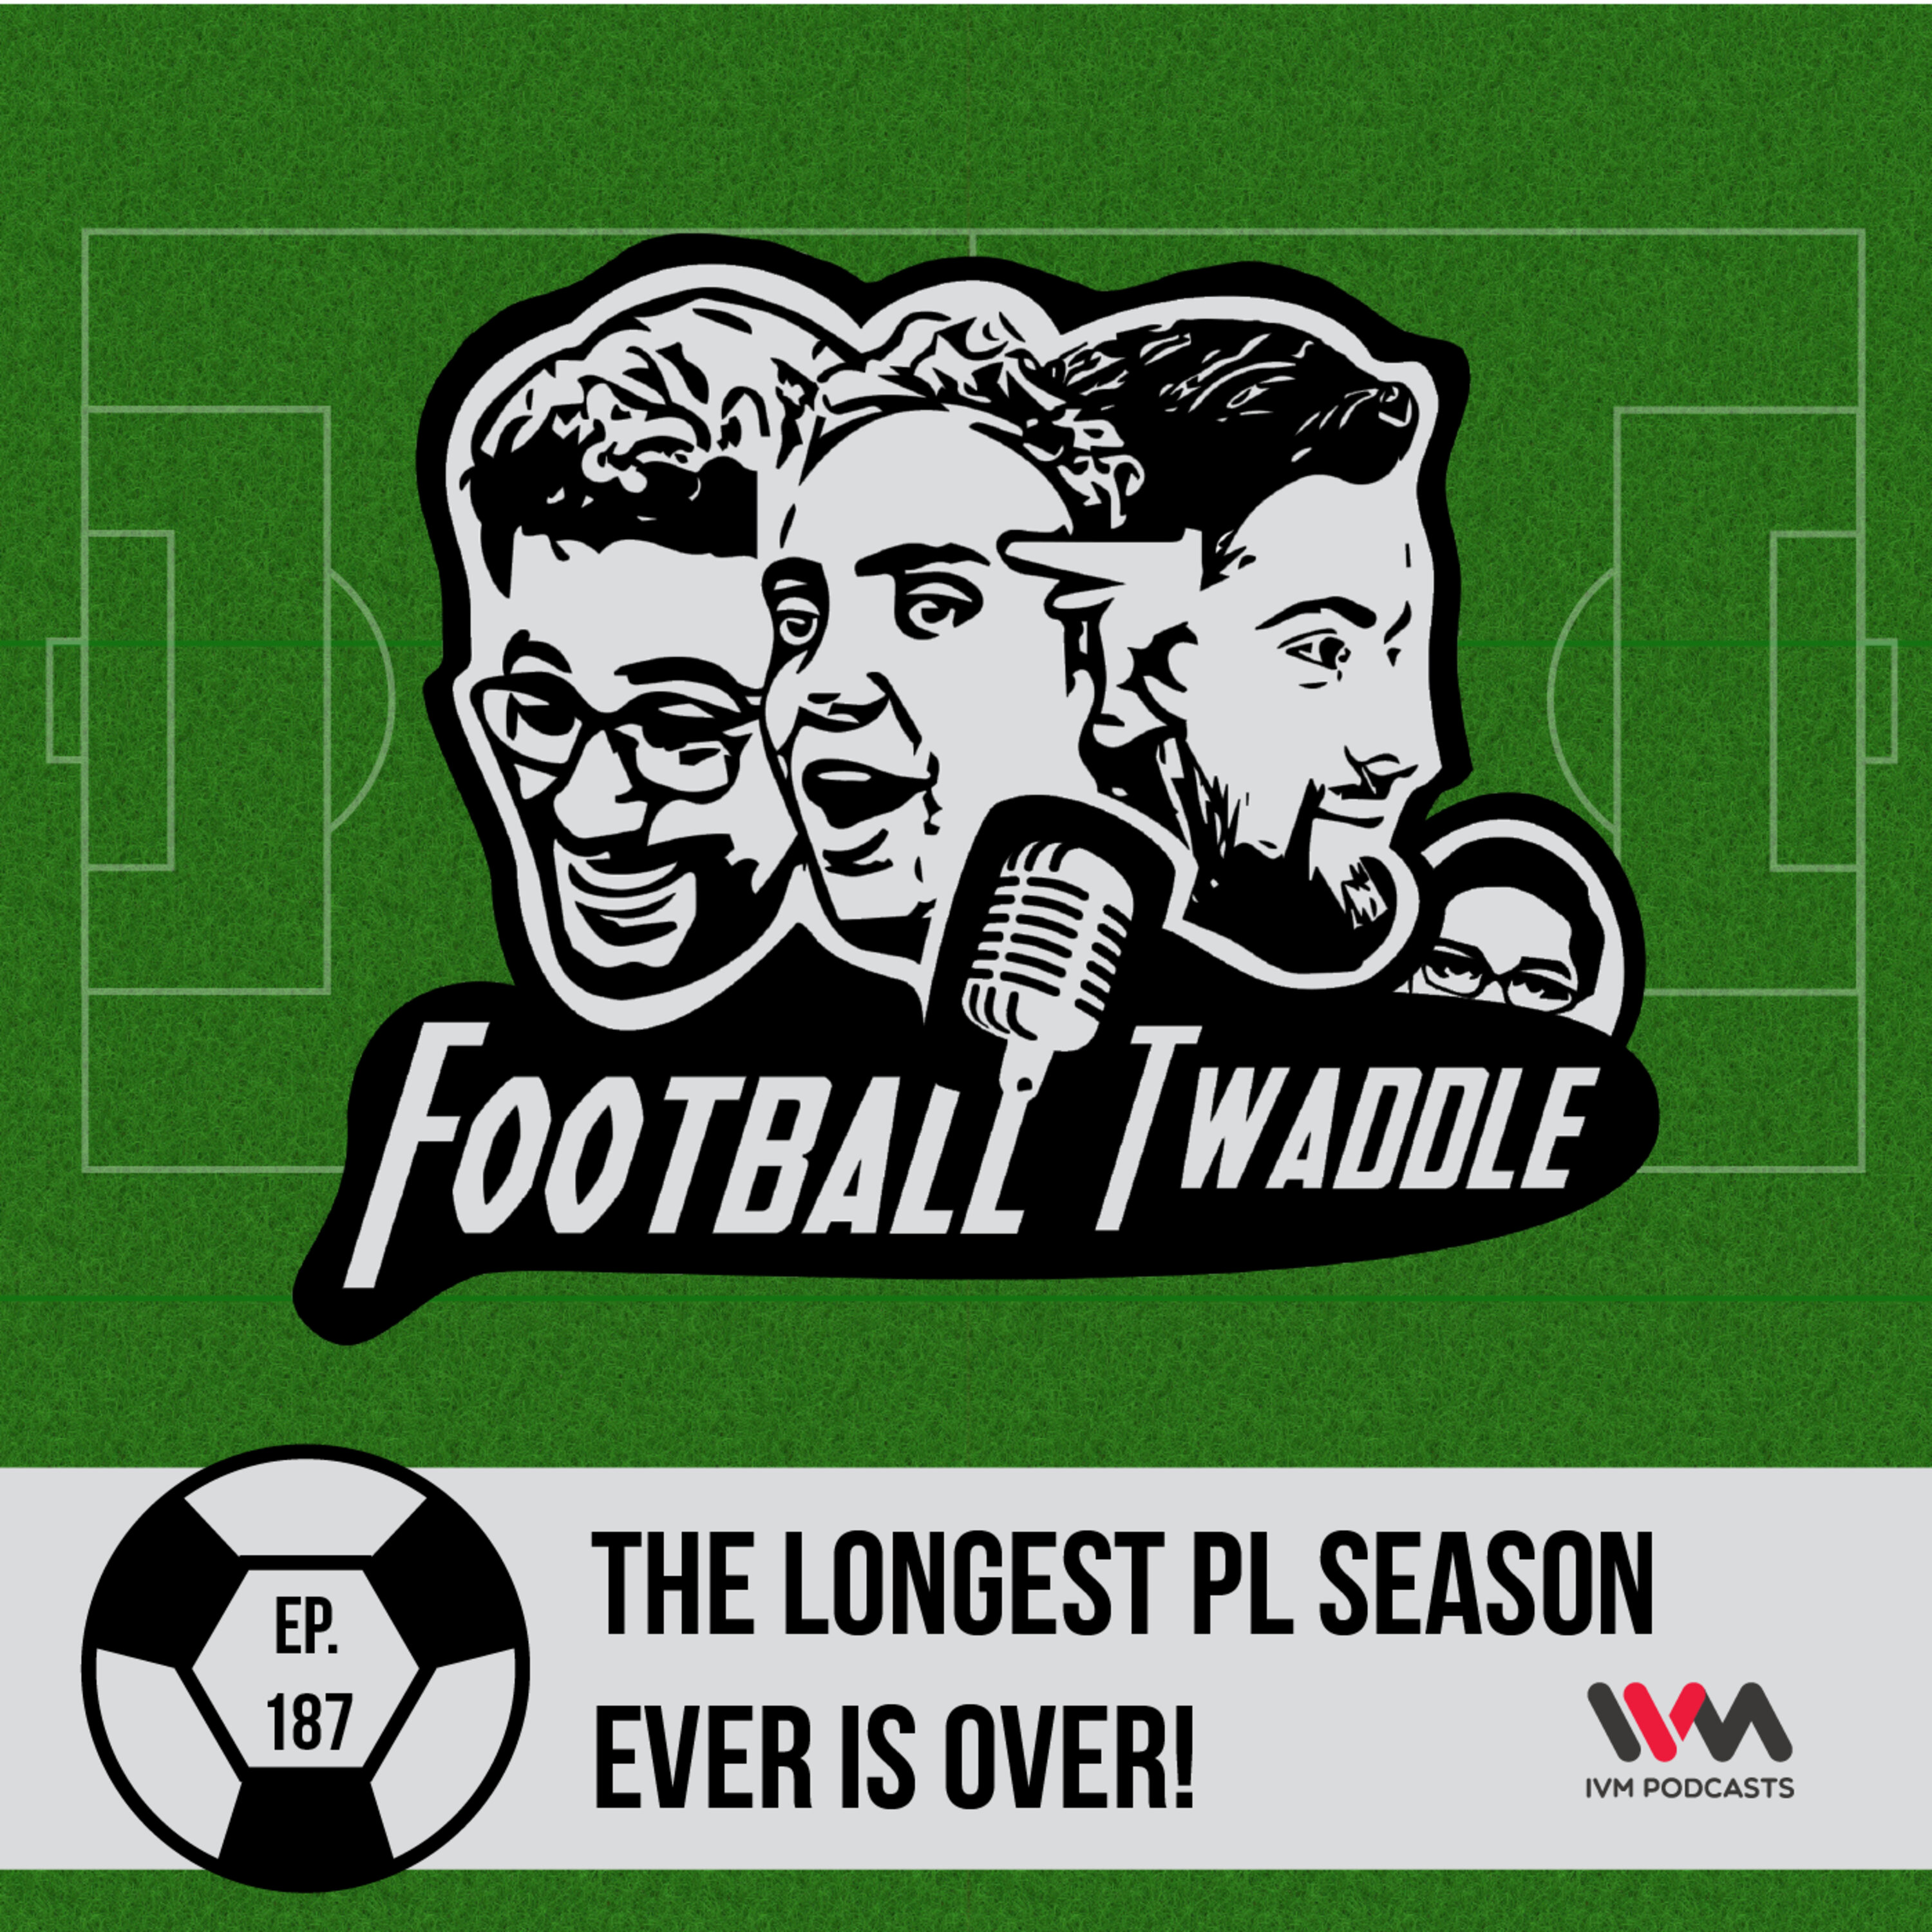 The Longest PL Season Ever is Over!